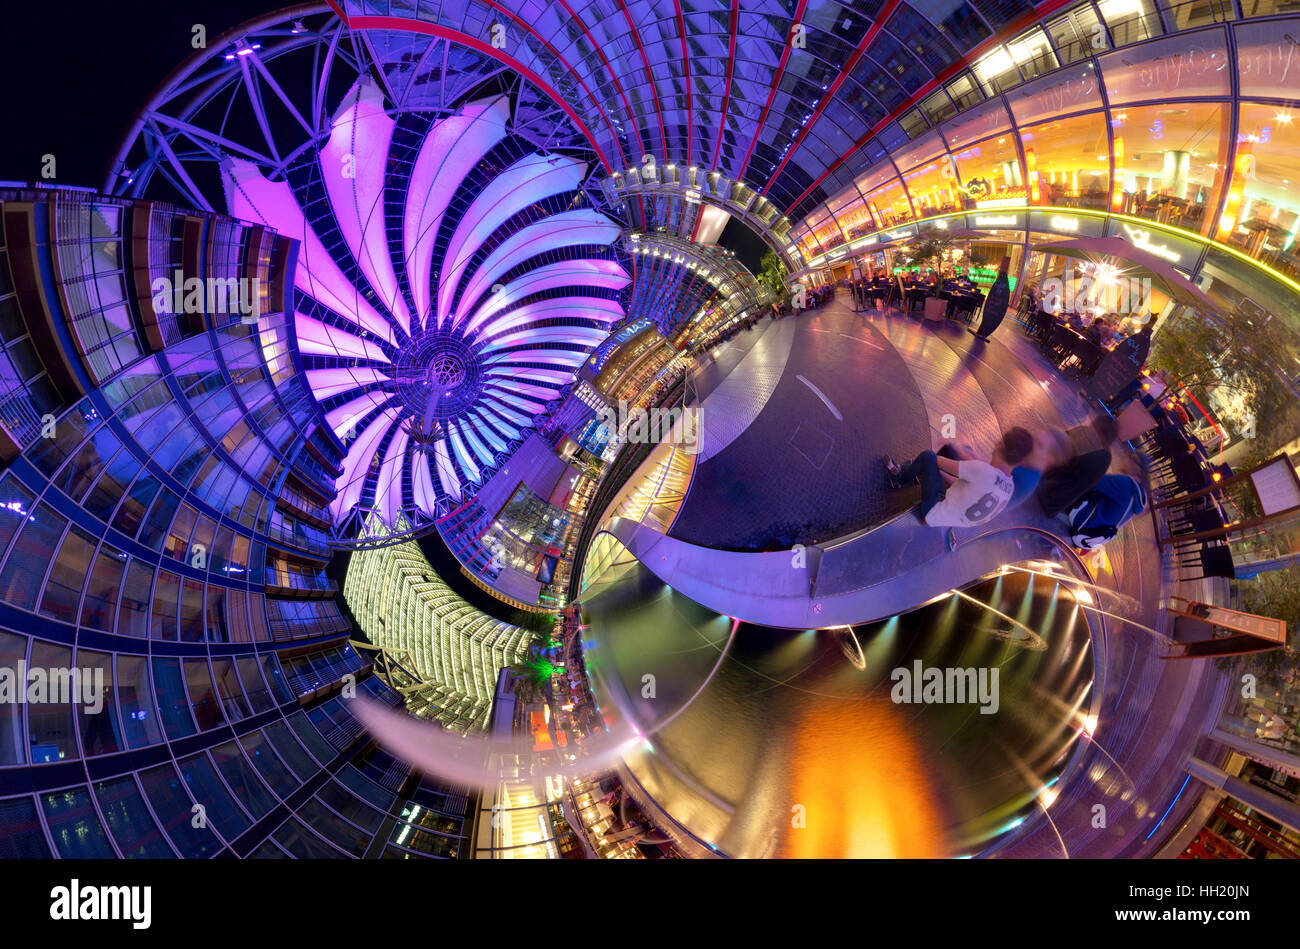 Full panoramic image of the inside of the Sony Center Potsdamer Platz at night in Berlin - Germany. Stock Photo